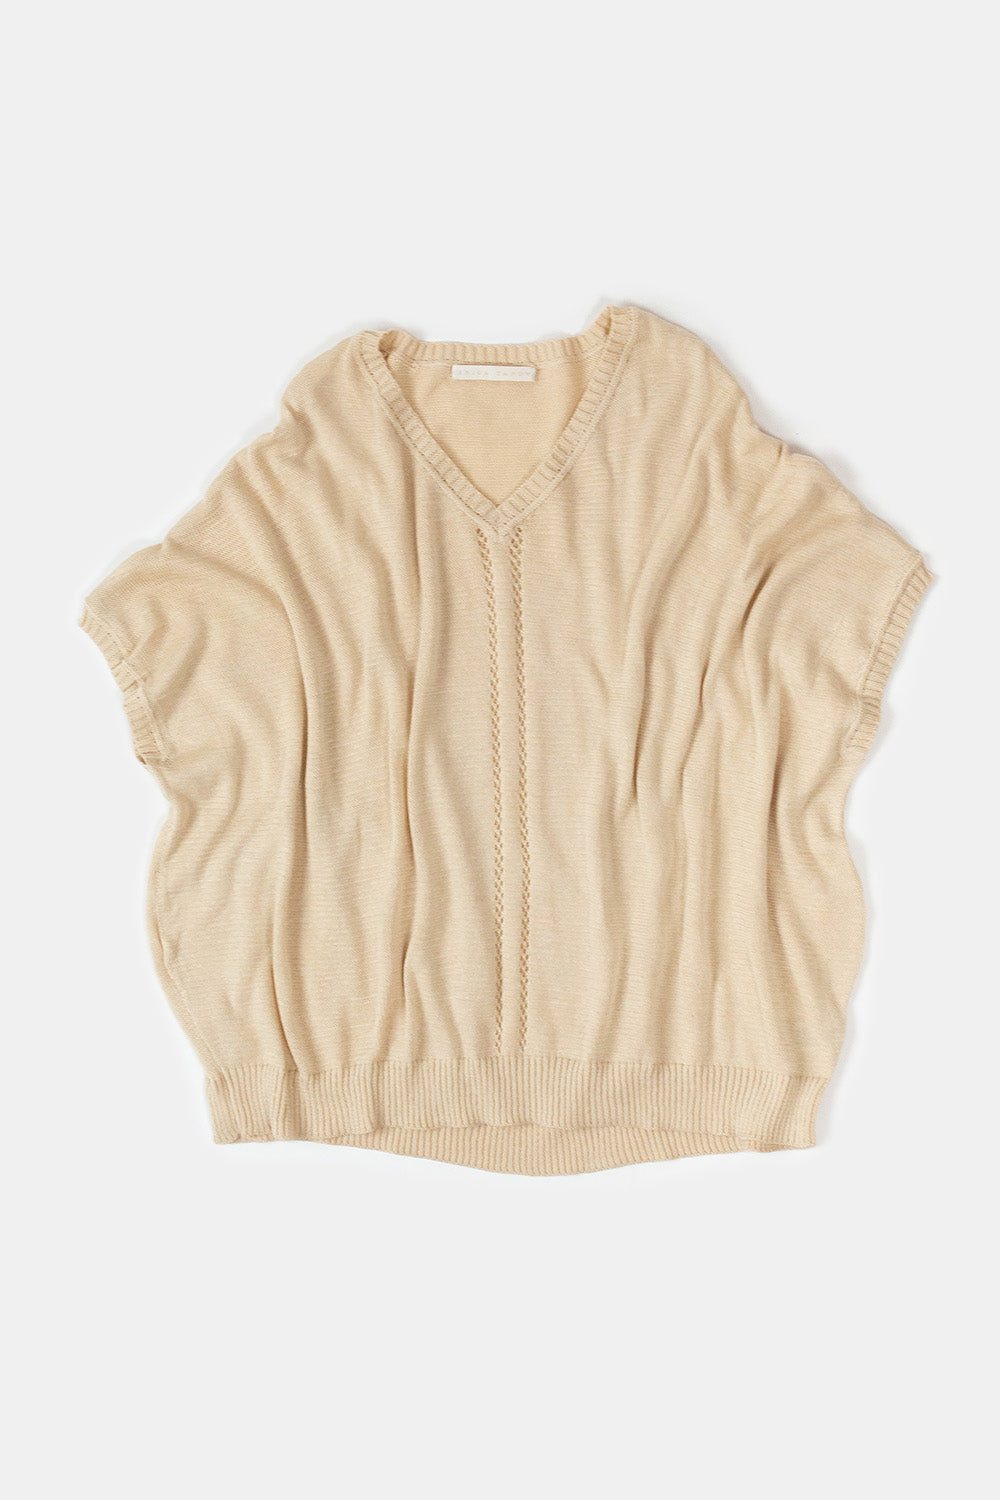 Pima Cotton V Neck Cocoon Sweater in Natural